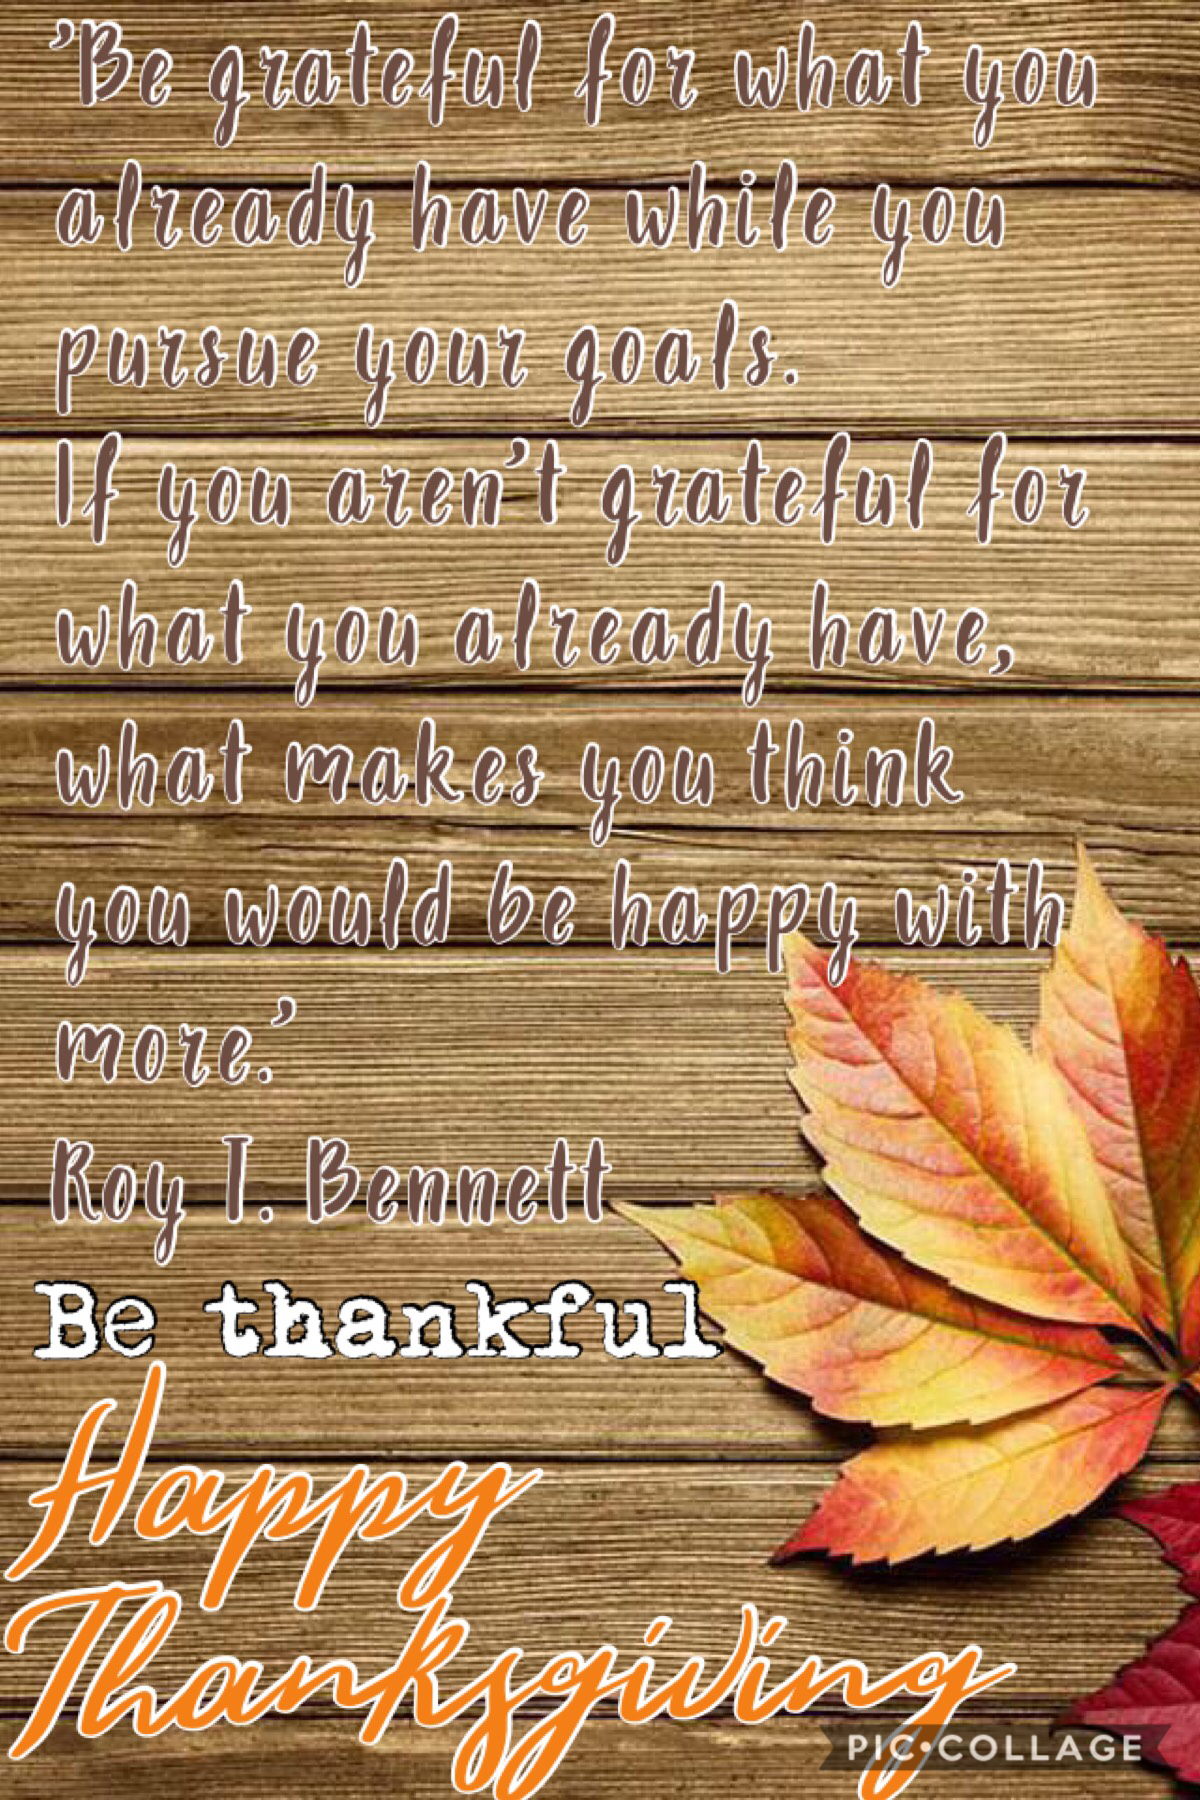 My entry for the PicCollage Thanksgiving Contest! @piccollage